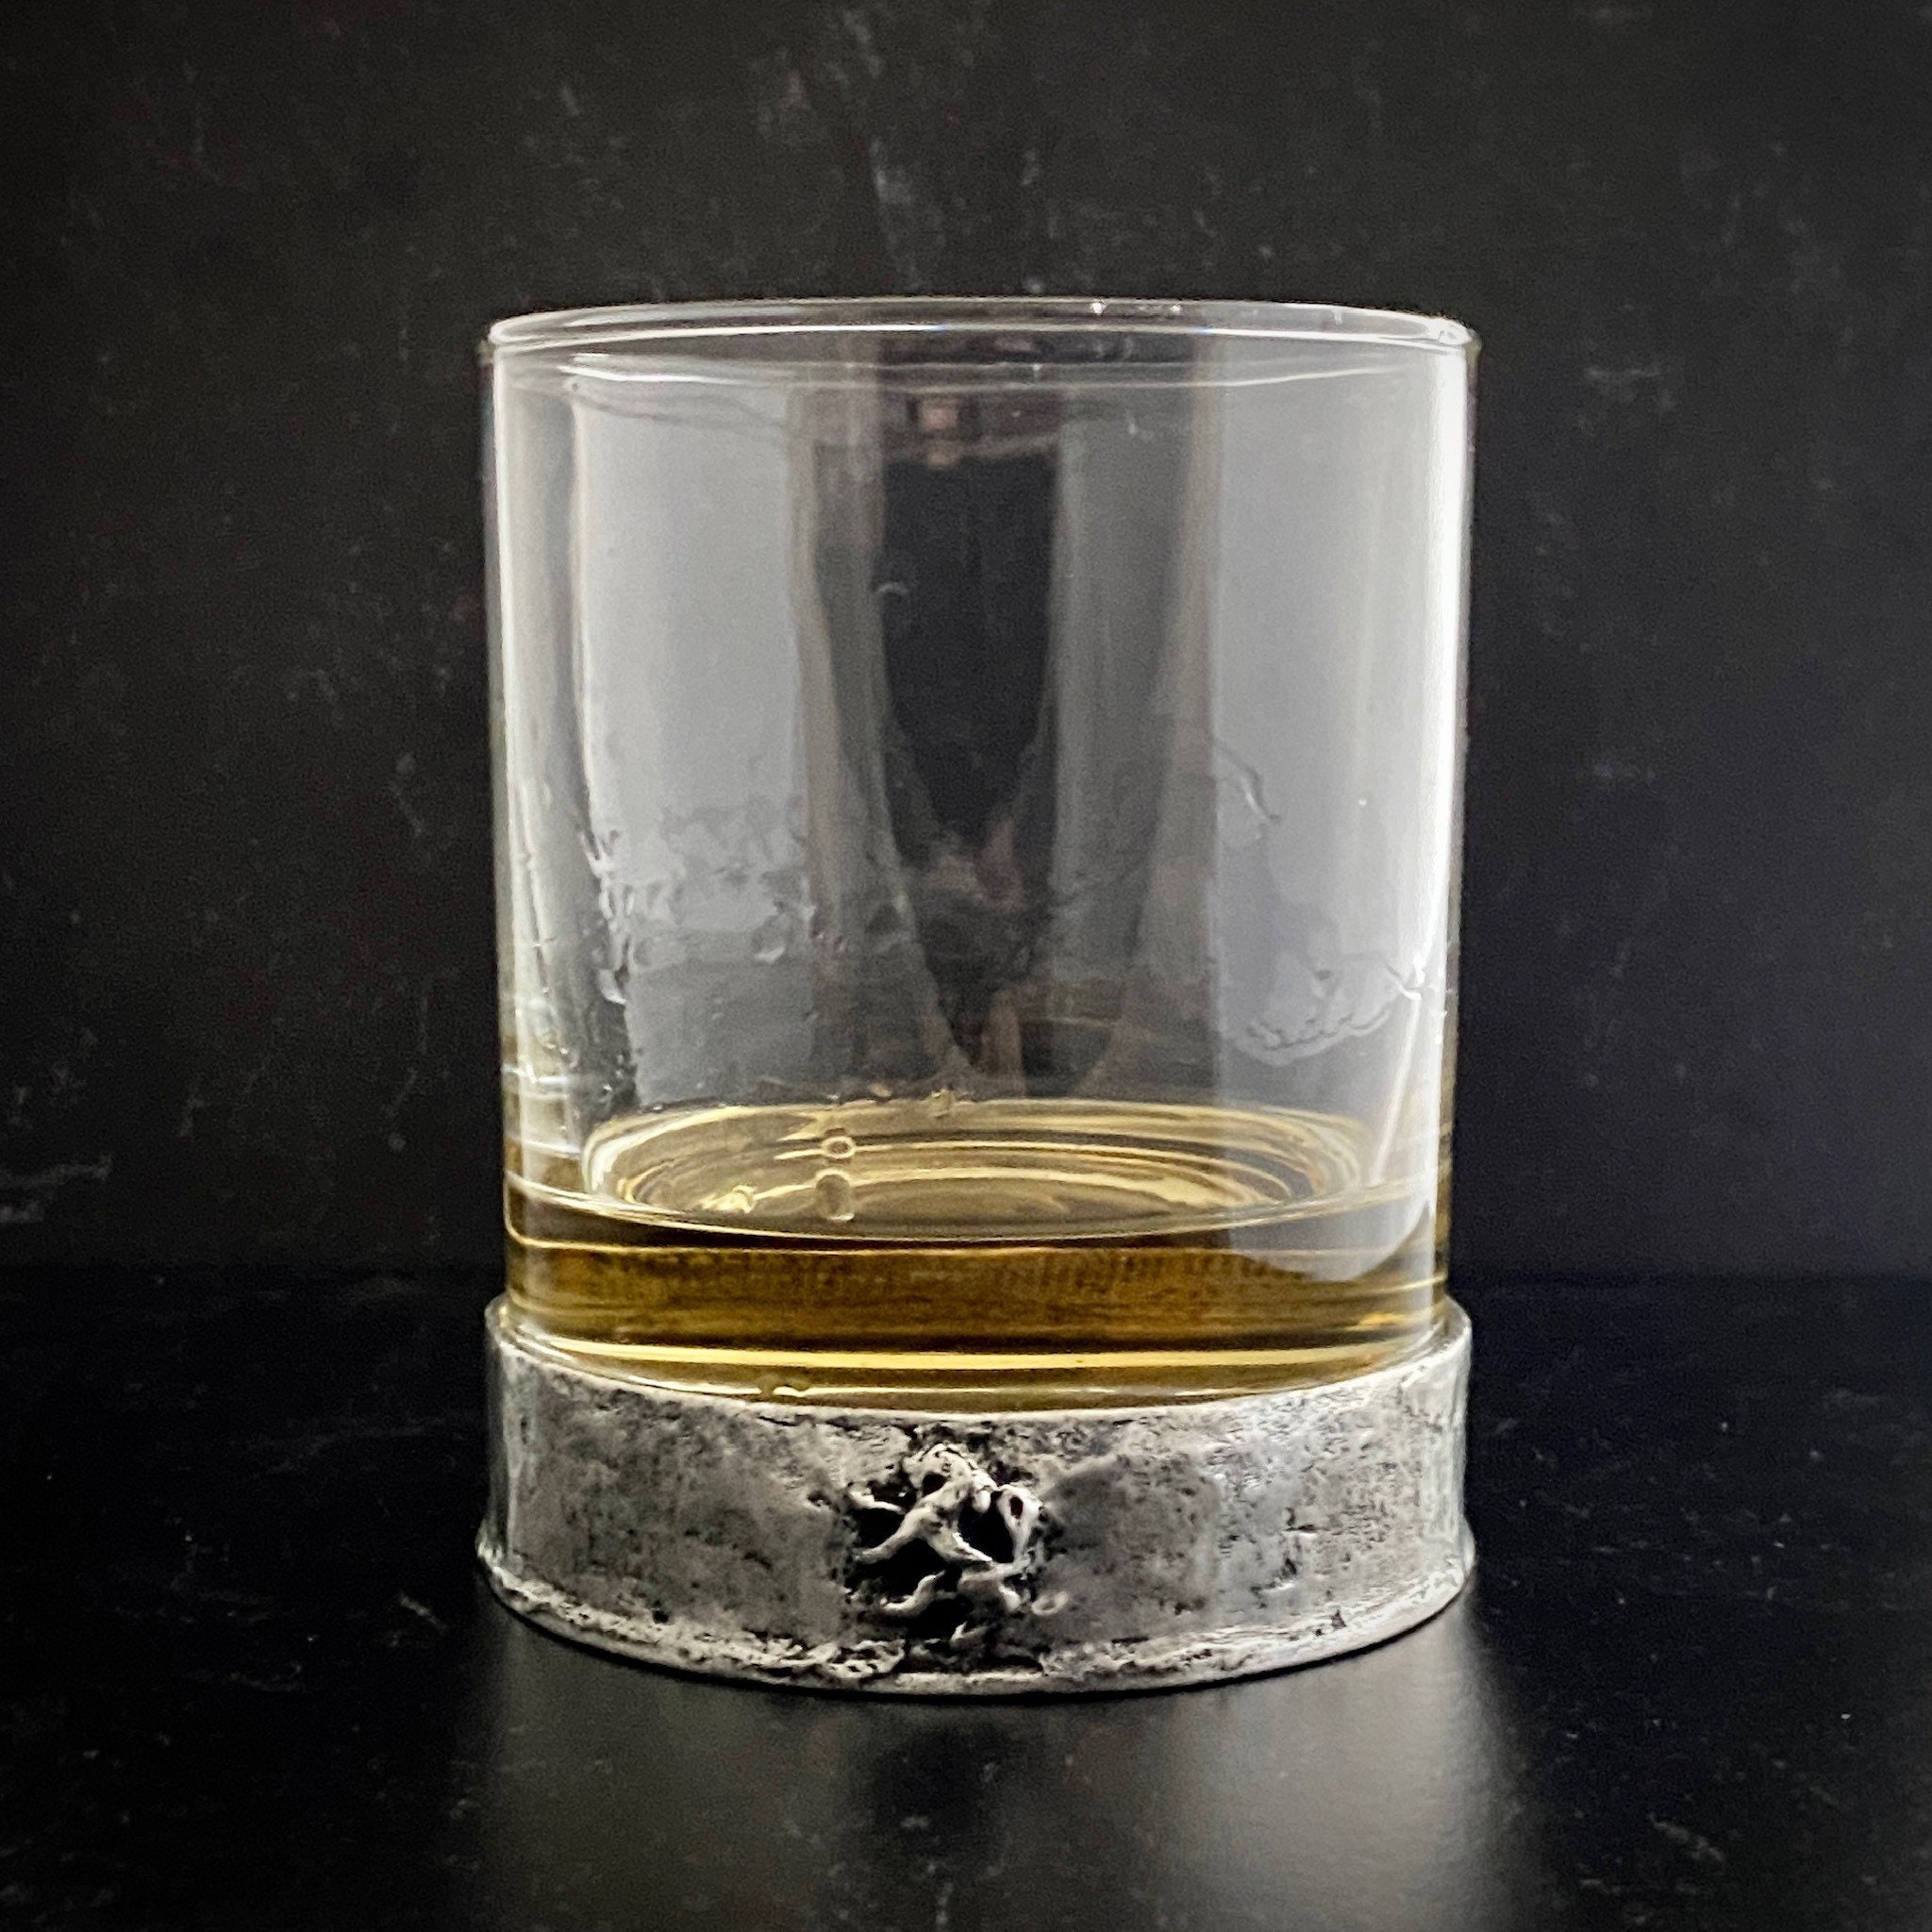 Unique Everest Bourbon Glasses Set of 2 in Fabric-Lined Gift Box -  Mountains Theme - Heavy Freezable…See more Unique Everest Bourbon Glasses  Set of 2